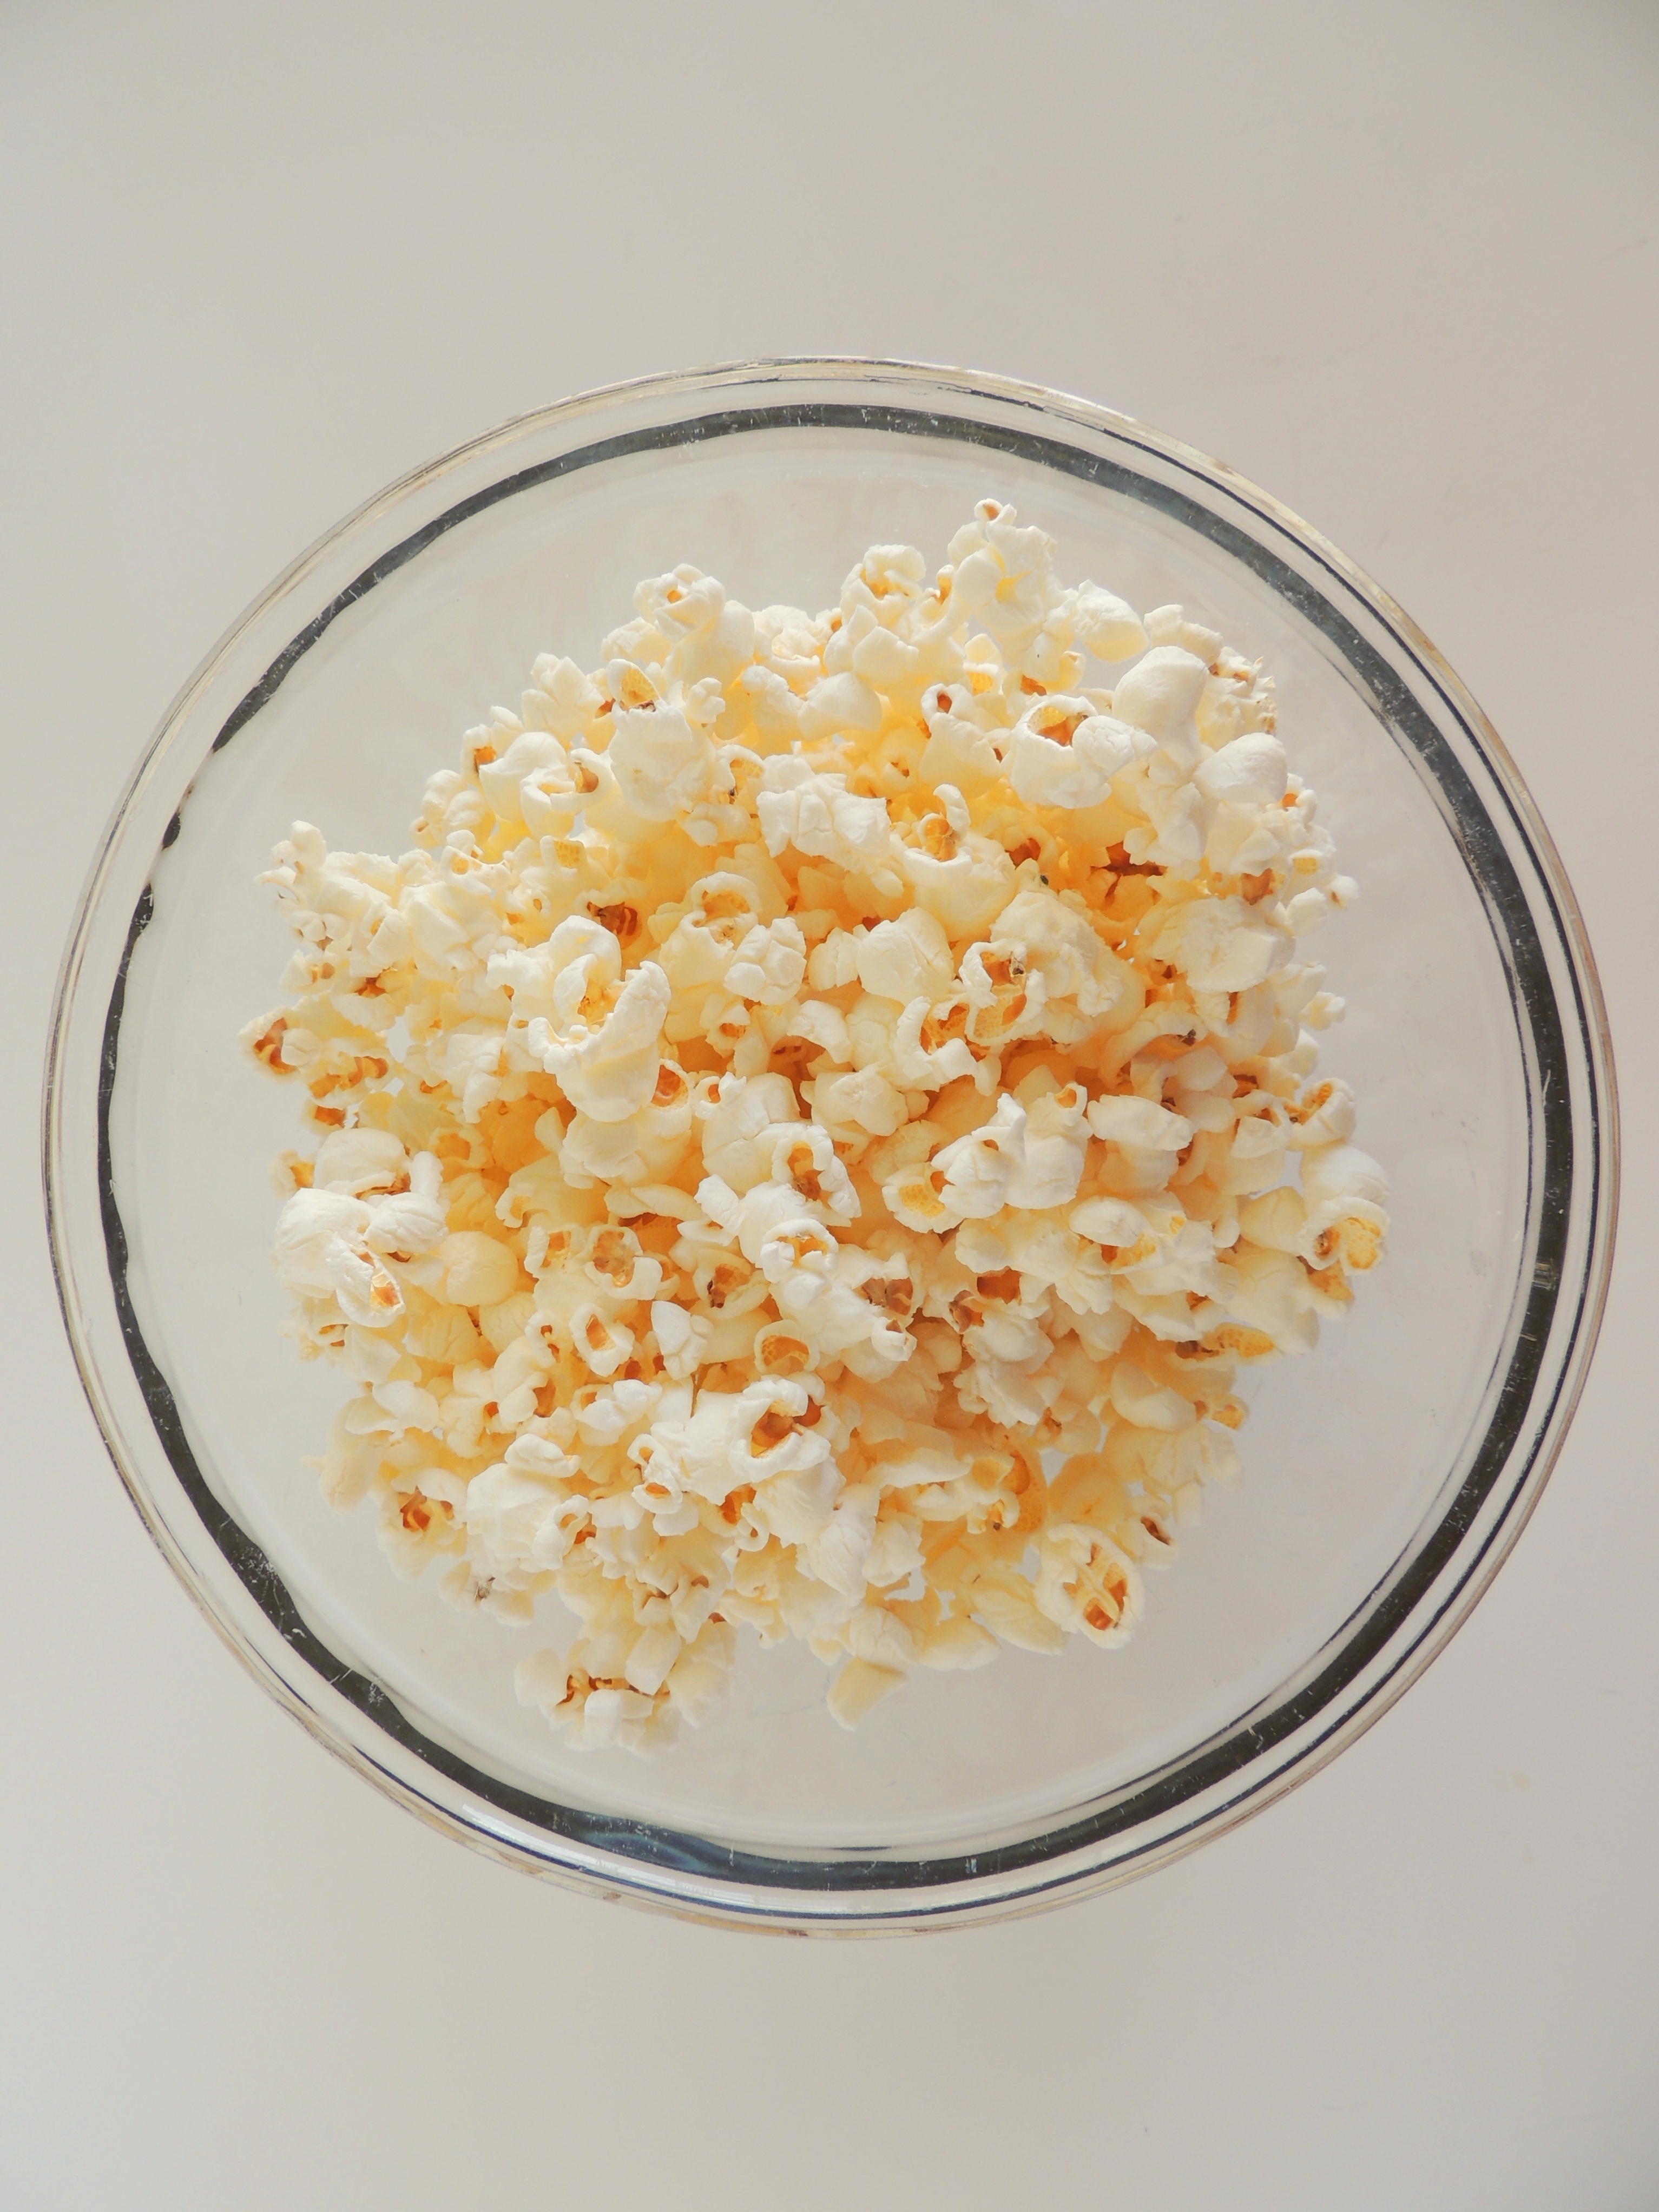 Popcorn in a bowl